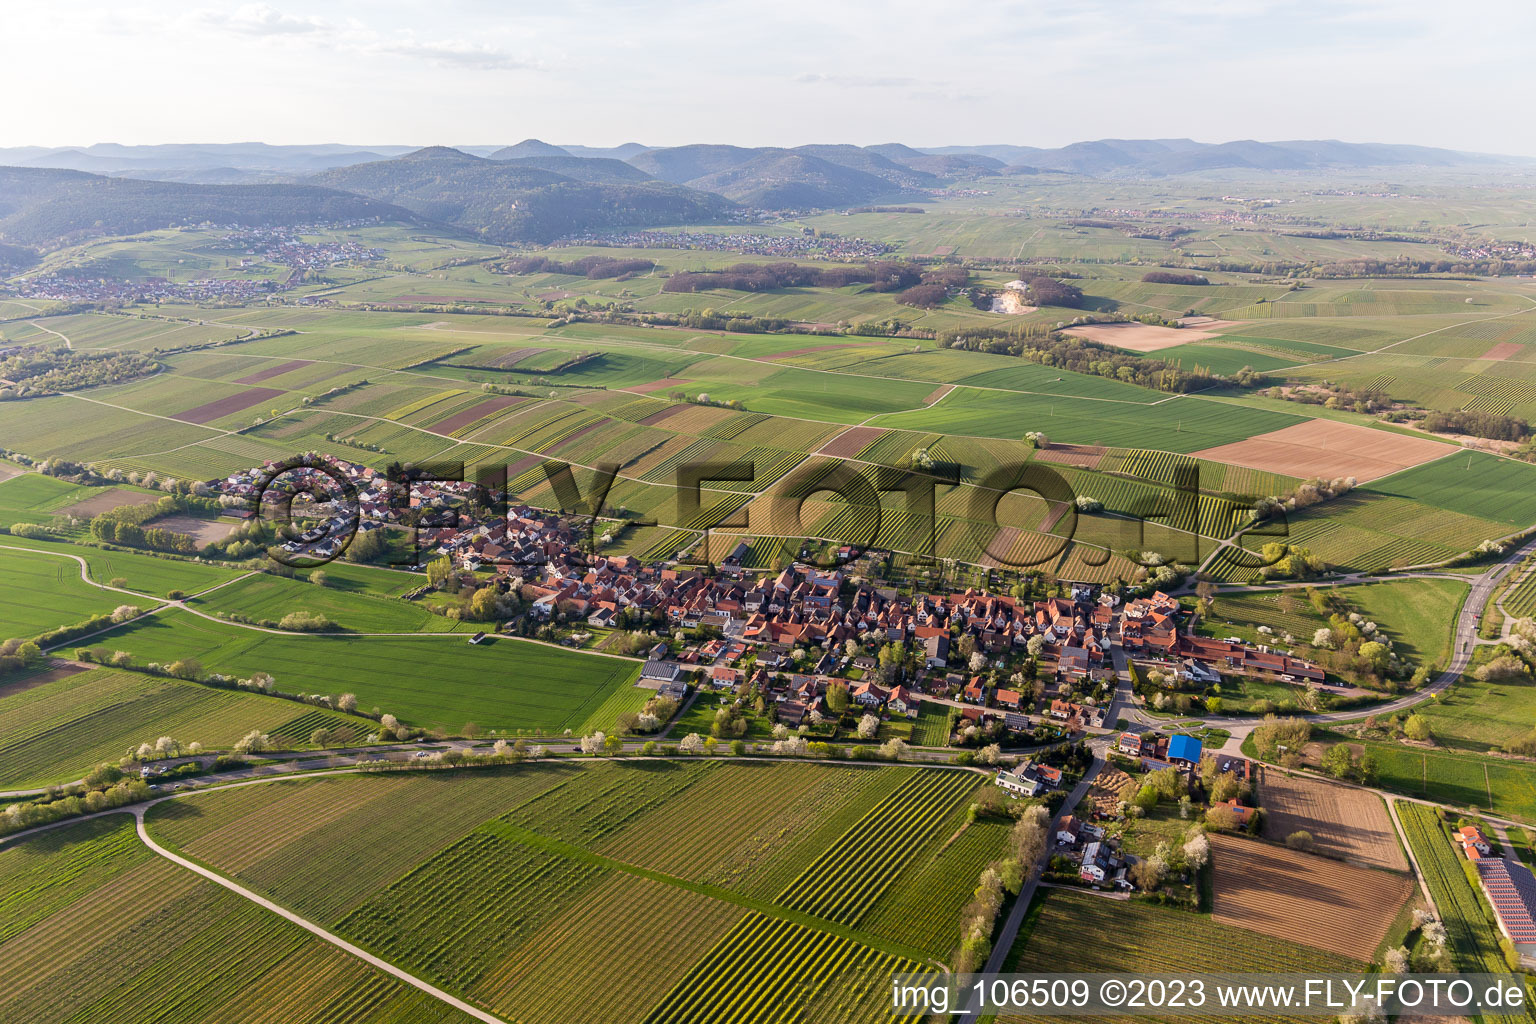 Niederhorbach in the state Rhineland-Palatinate, Germany seen from above